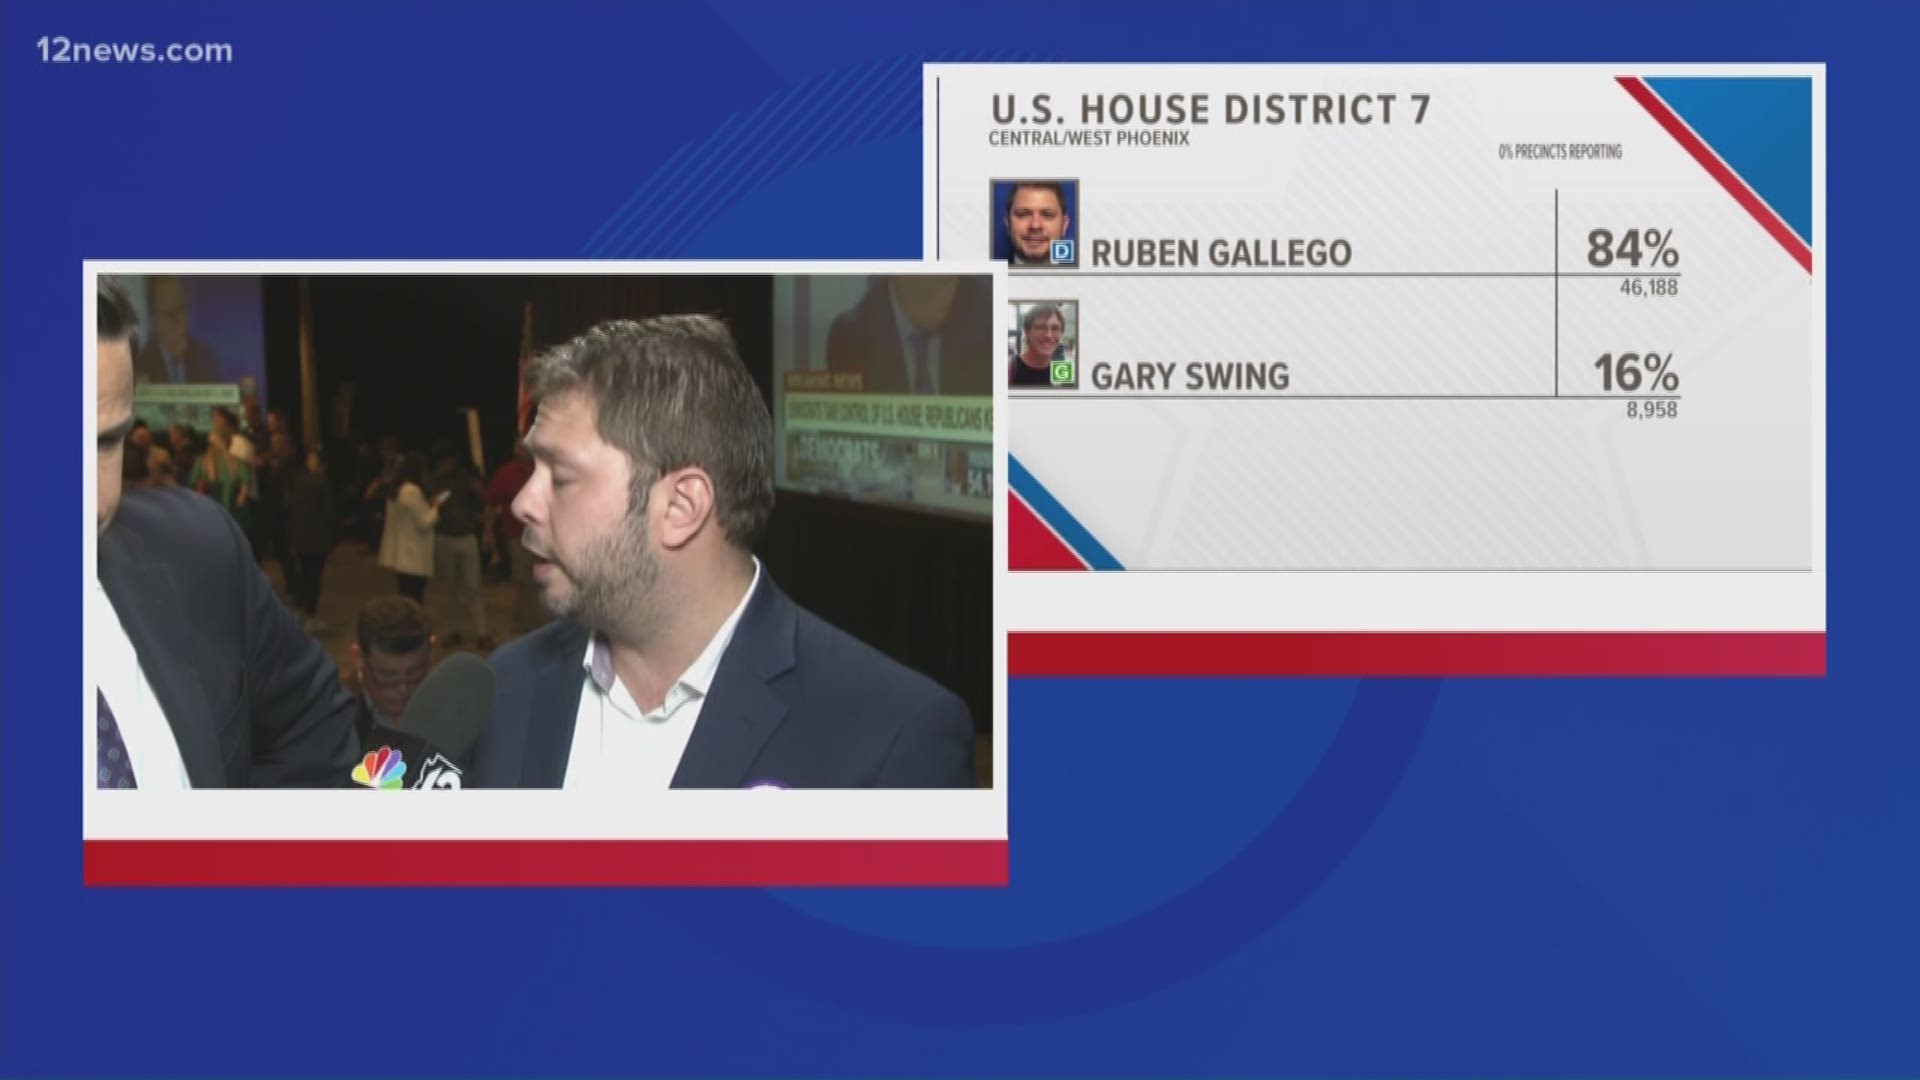 Ruben Gallego has been declared the winner of CD7 in the U.S. House of Representatives. He talks about his next two years, and the Democrats he is still hoping to see elected.